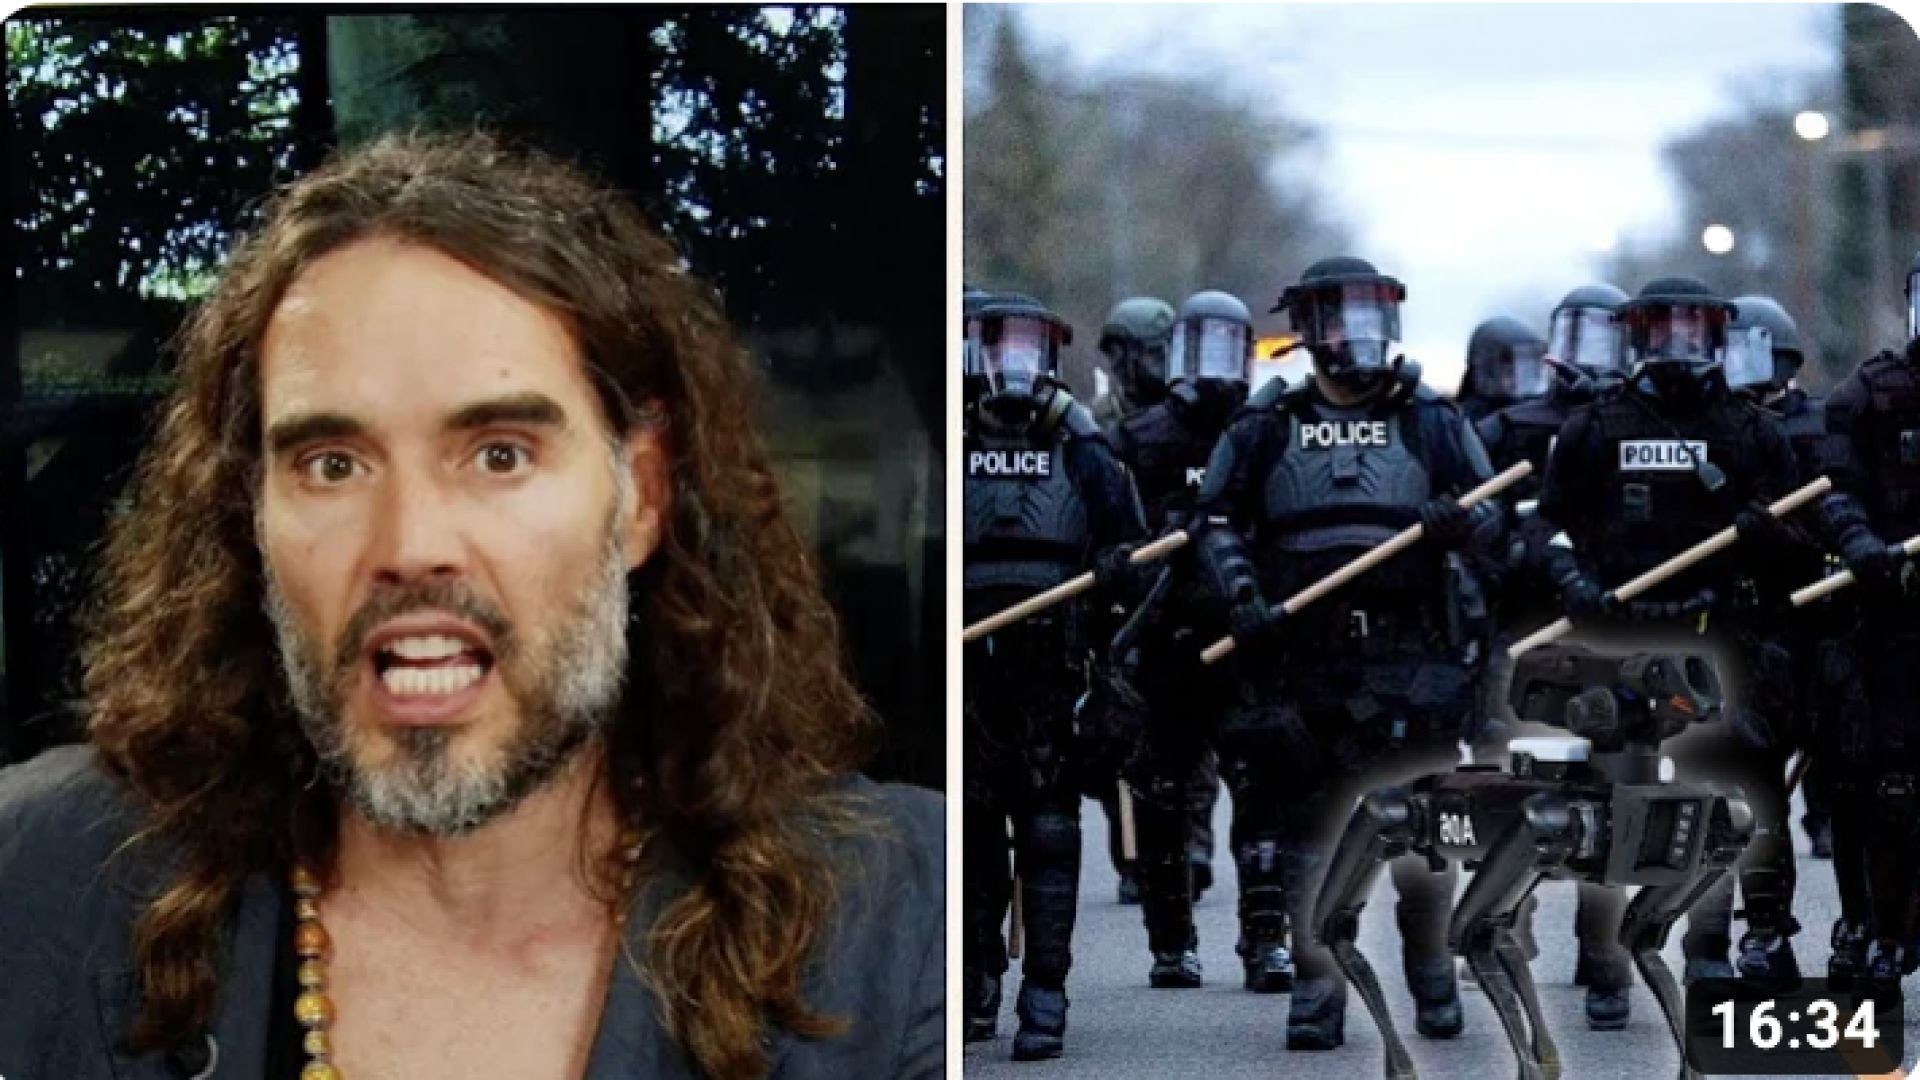 the nightmare begins...   Russell Brand with the Truth...'Stay Free'  (link below)